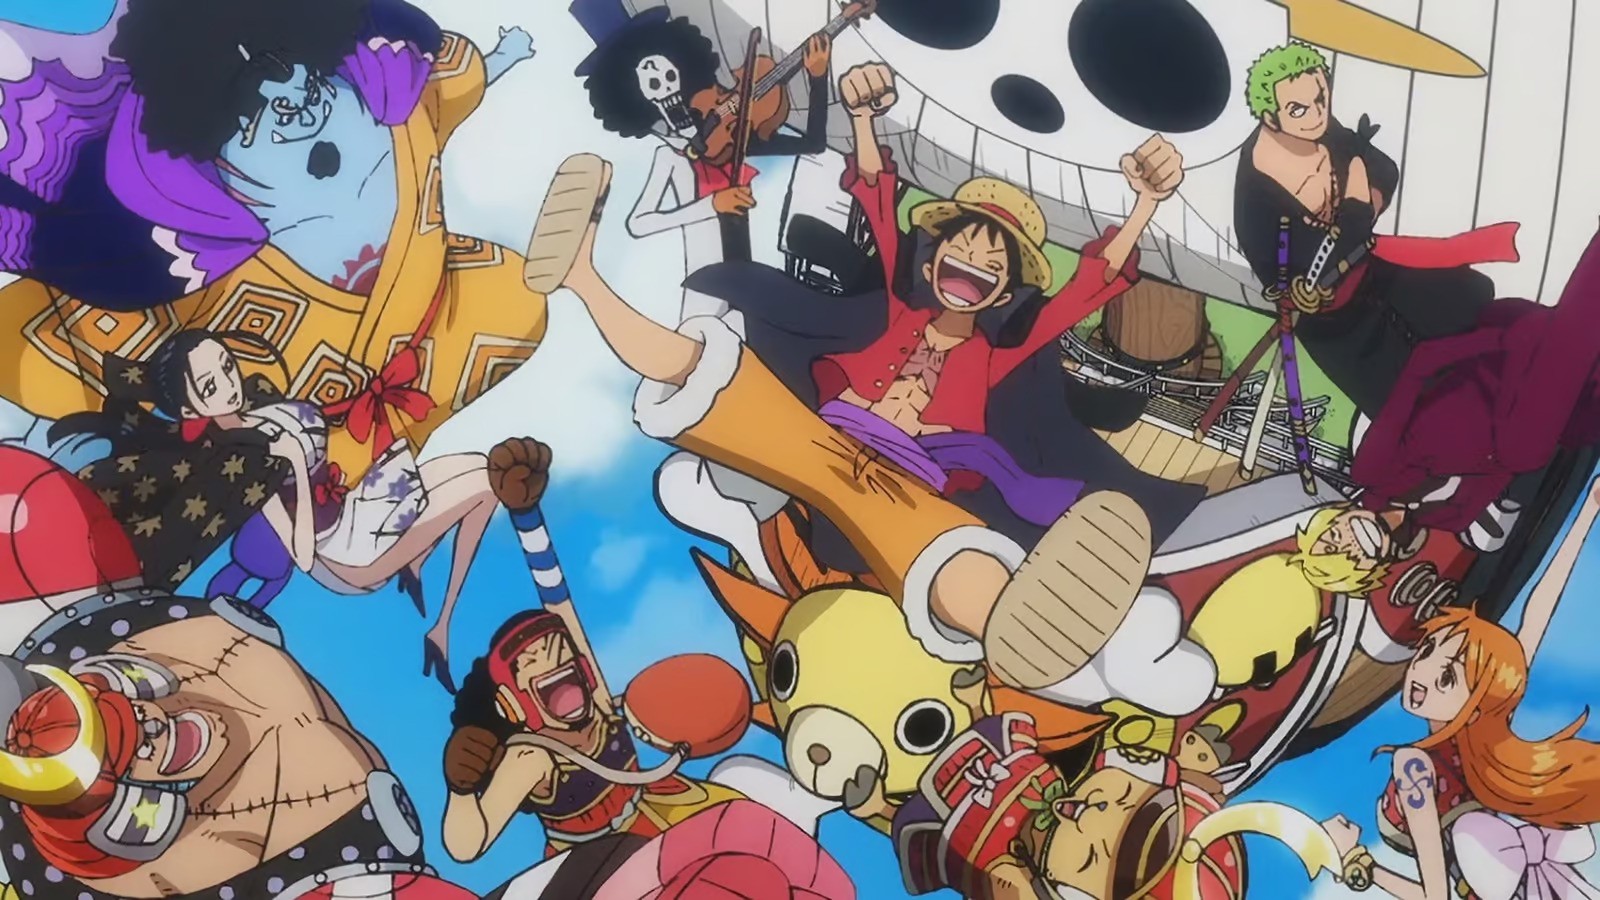 One Piece Film: Red Teases Shanks Story With New Trailer!